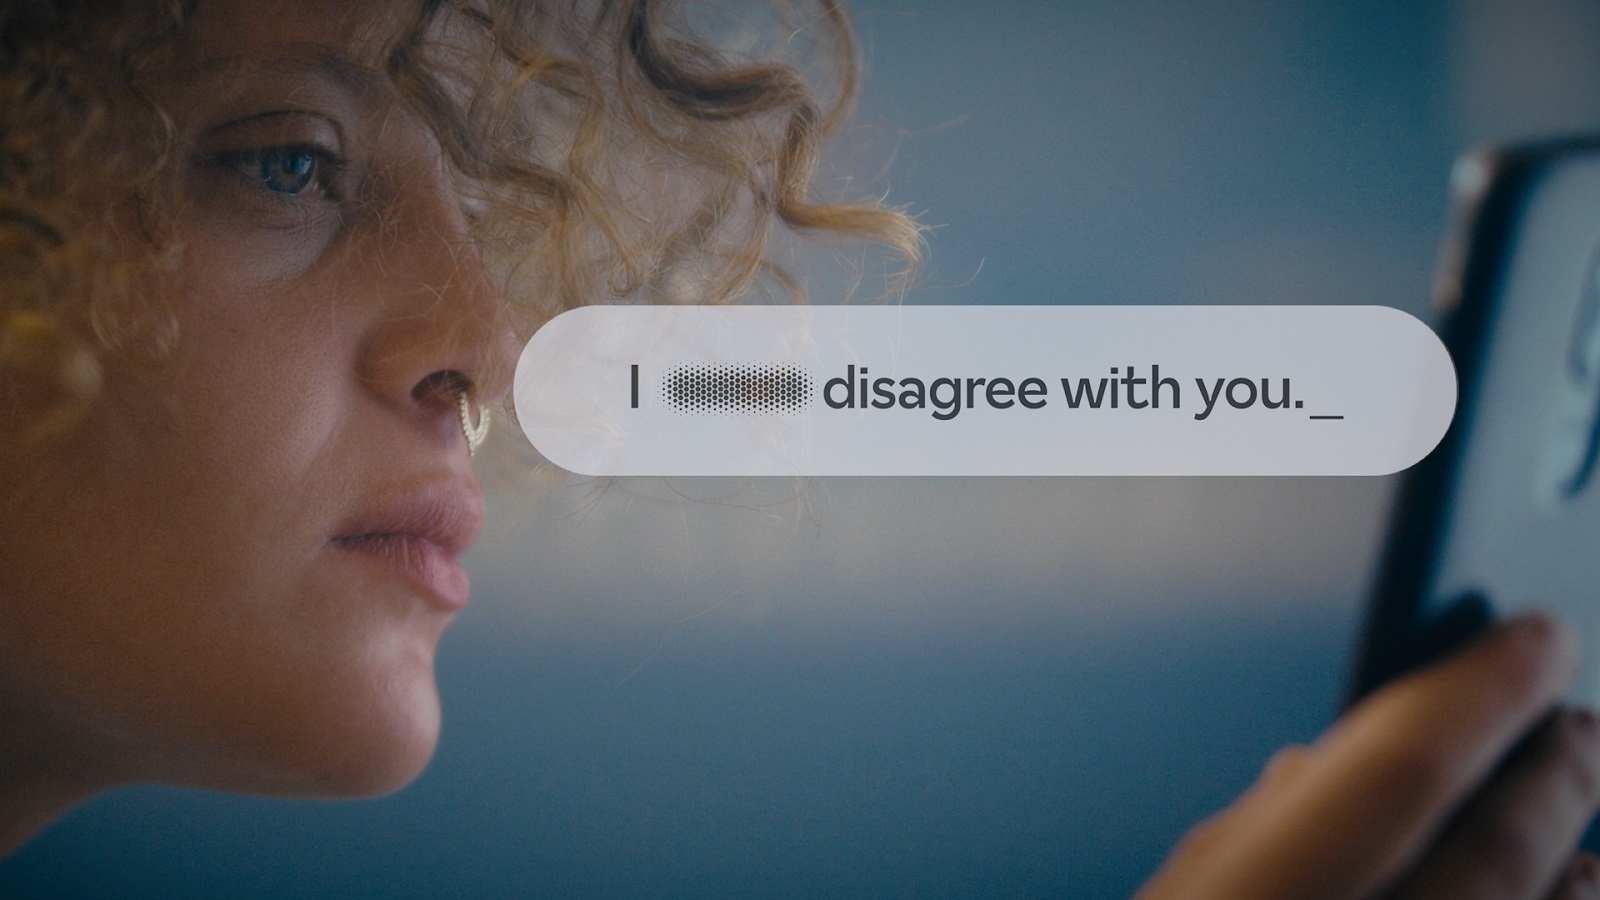 #TBT: Turning Hateful Words into Polite Ones to Fight Cyberbullying